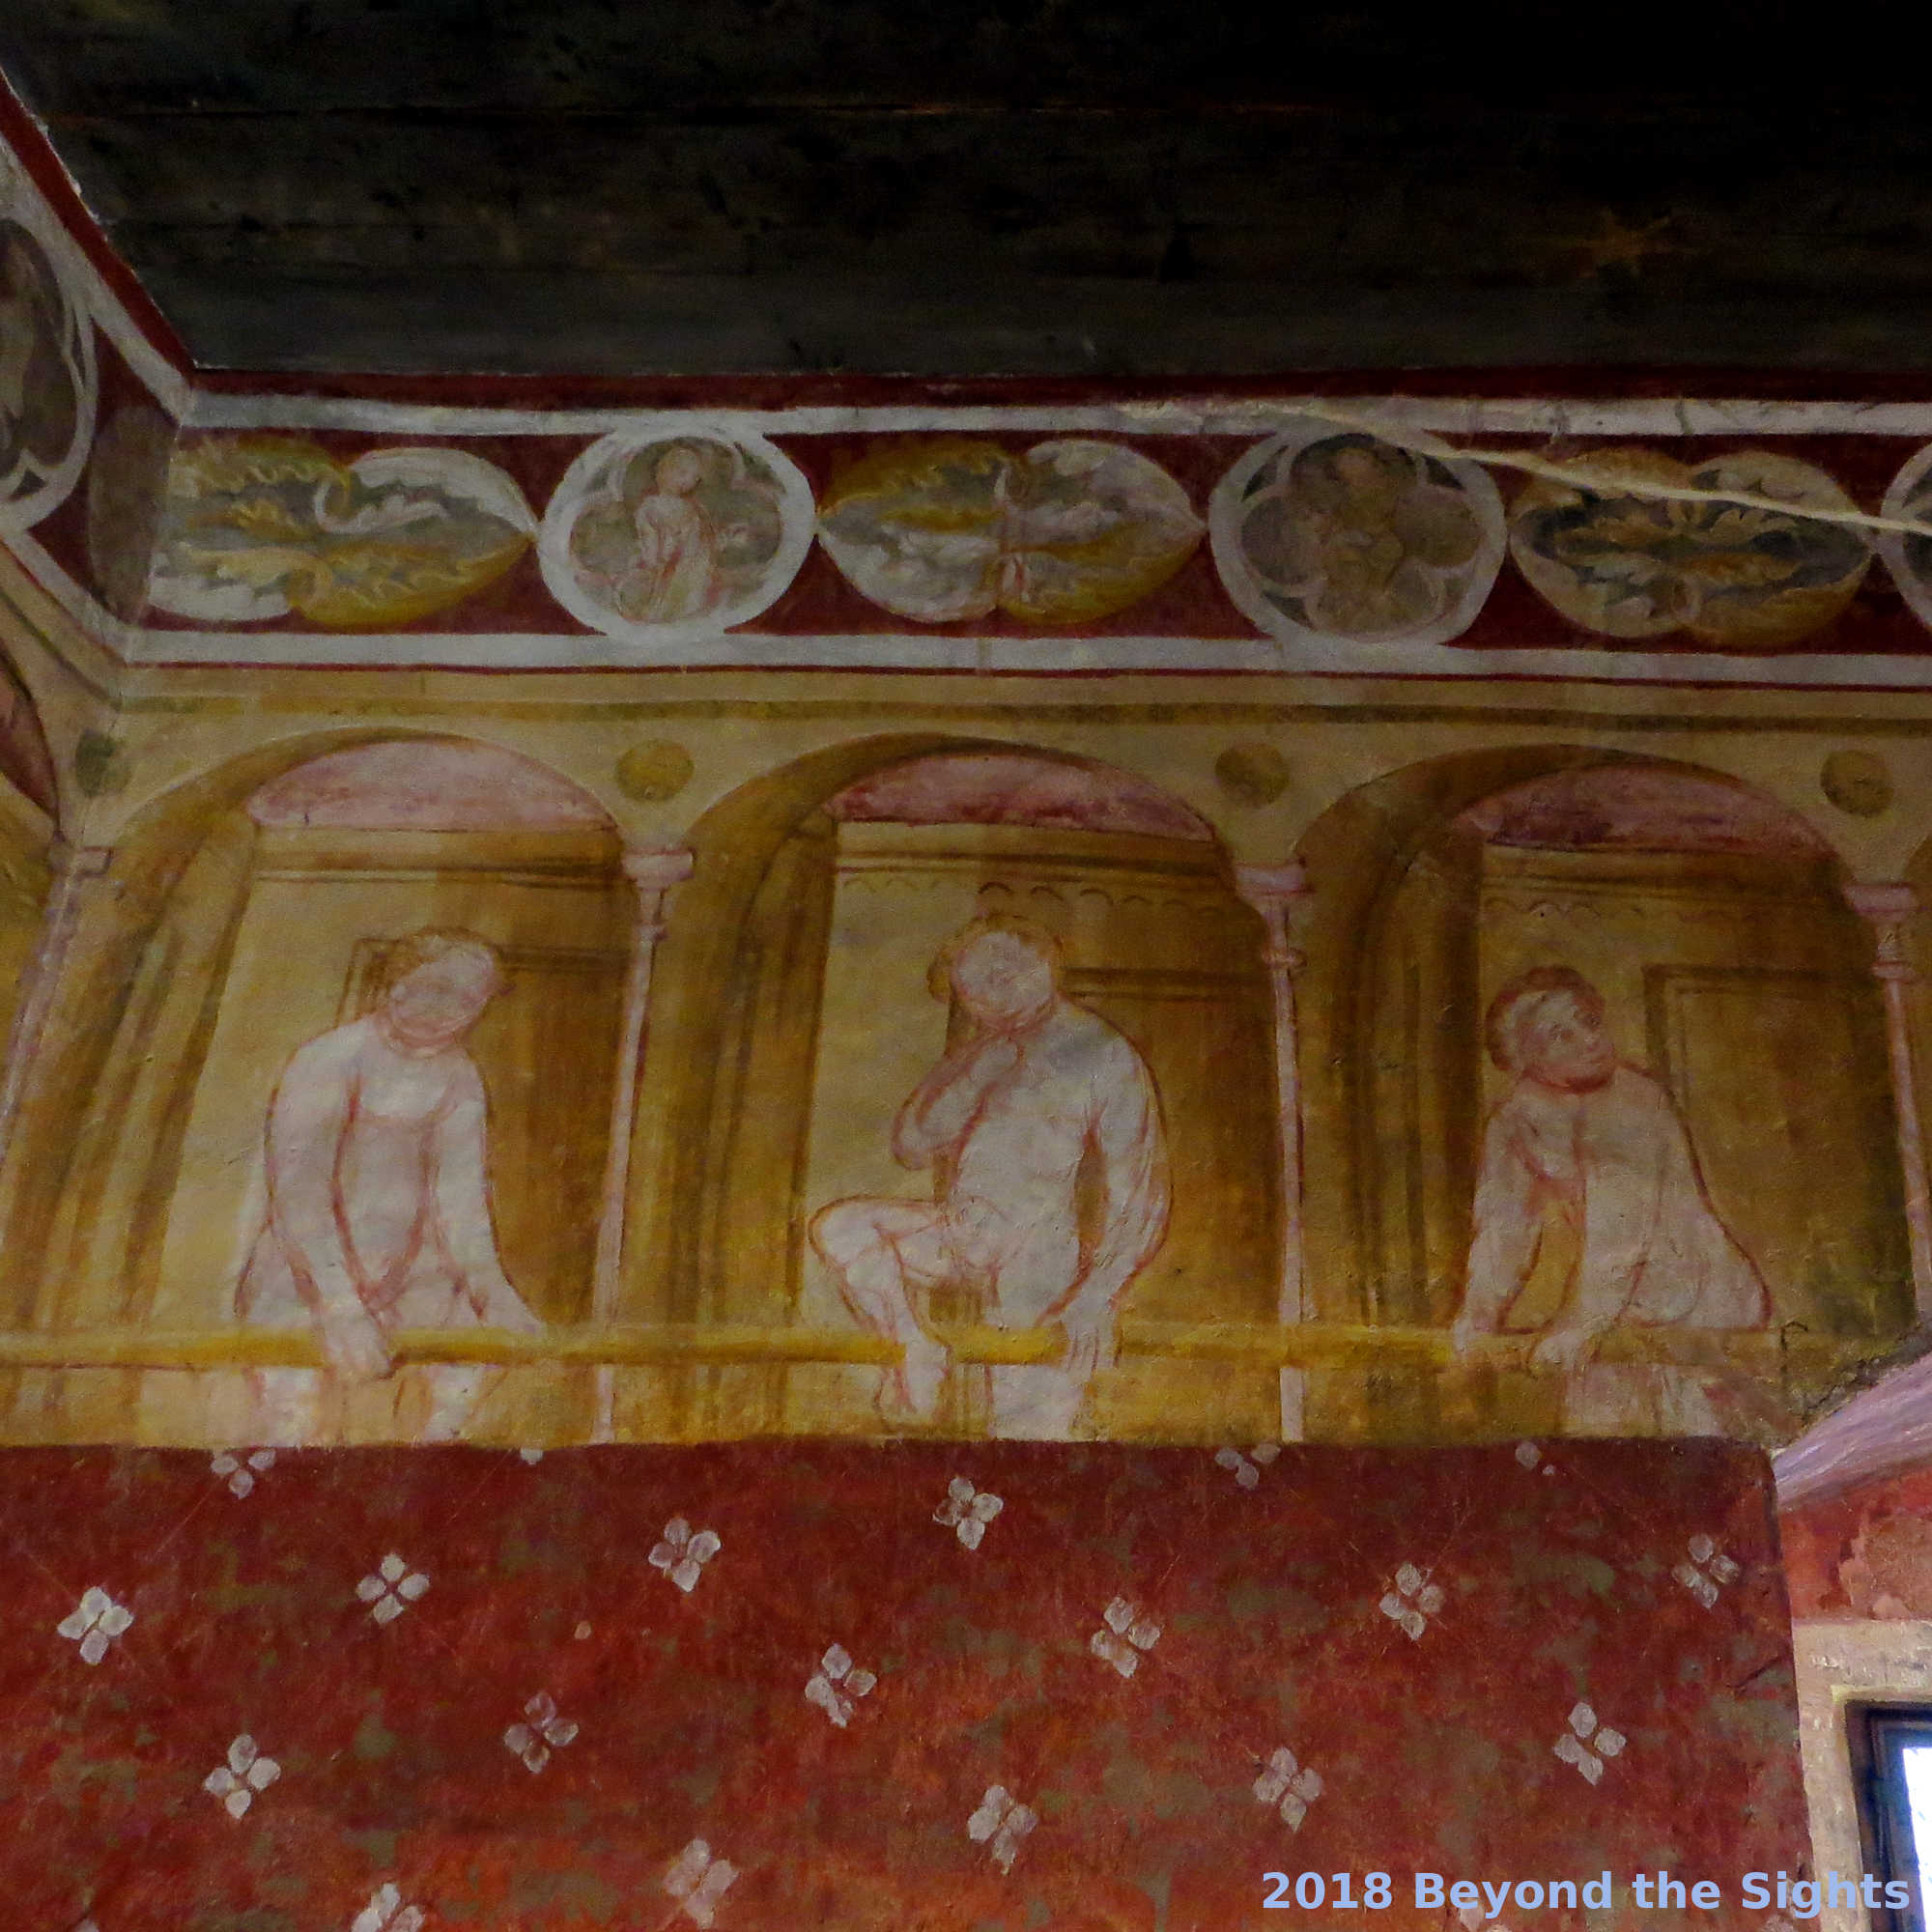 Another detail of the bath-fresco with unfinished figures